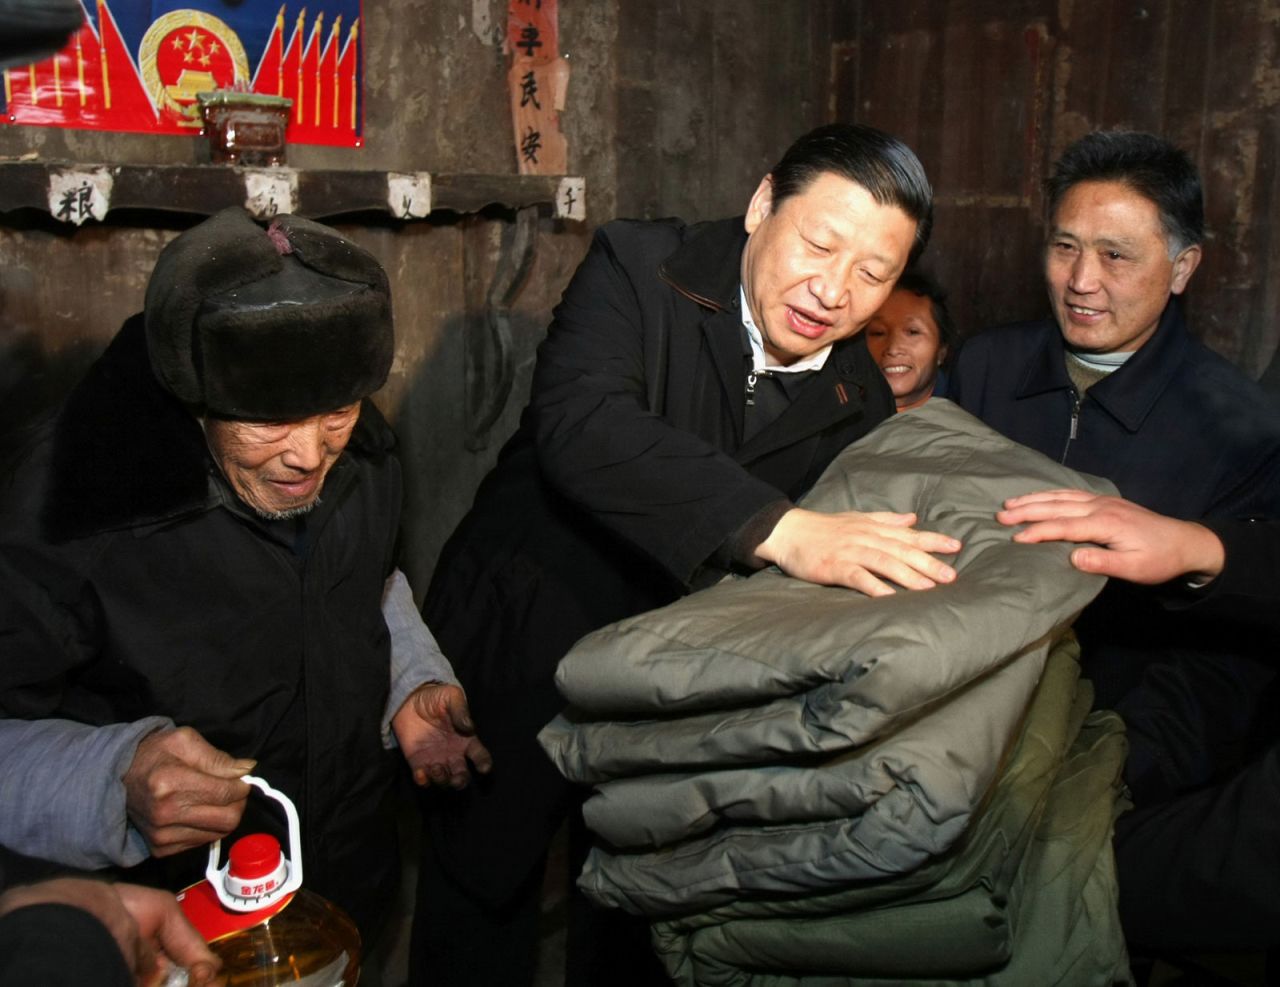 Xi brings blankets to a villager after ice storms in 2008. That year, Xi became China's vice president.